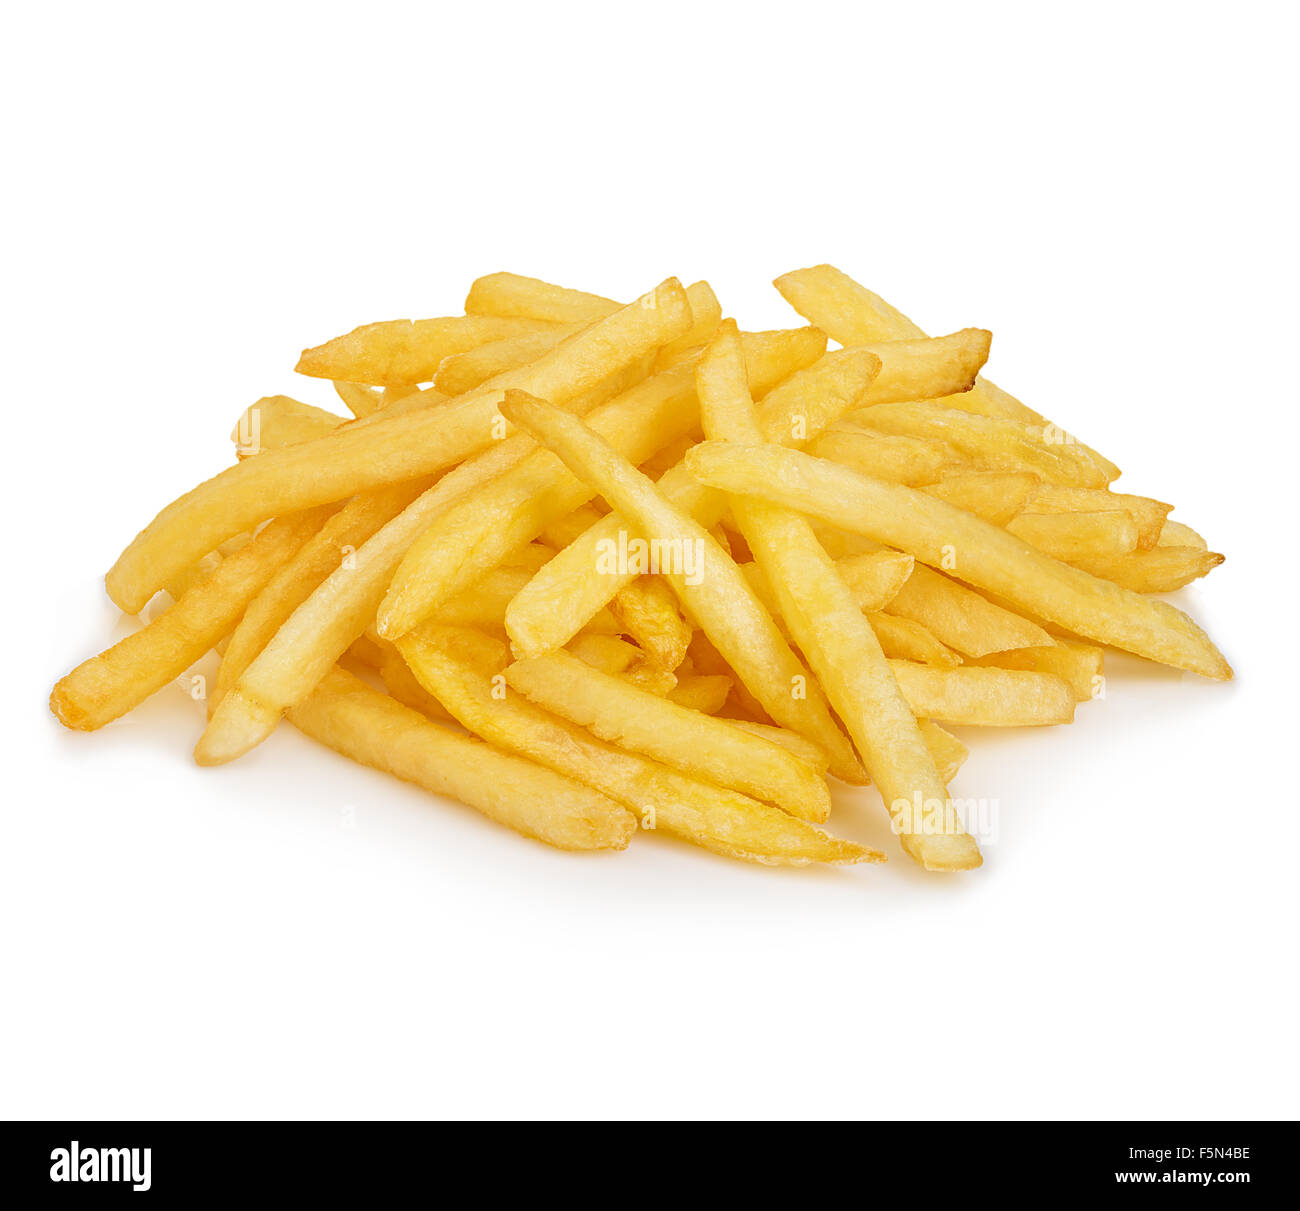 Pommes frites isolated on white Banque D'Images